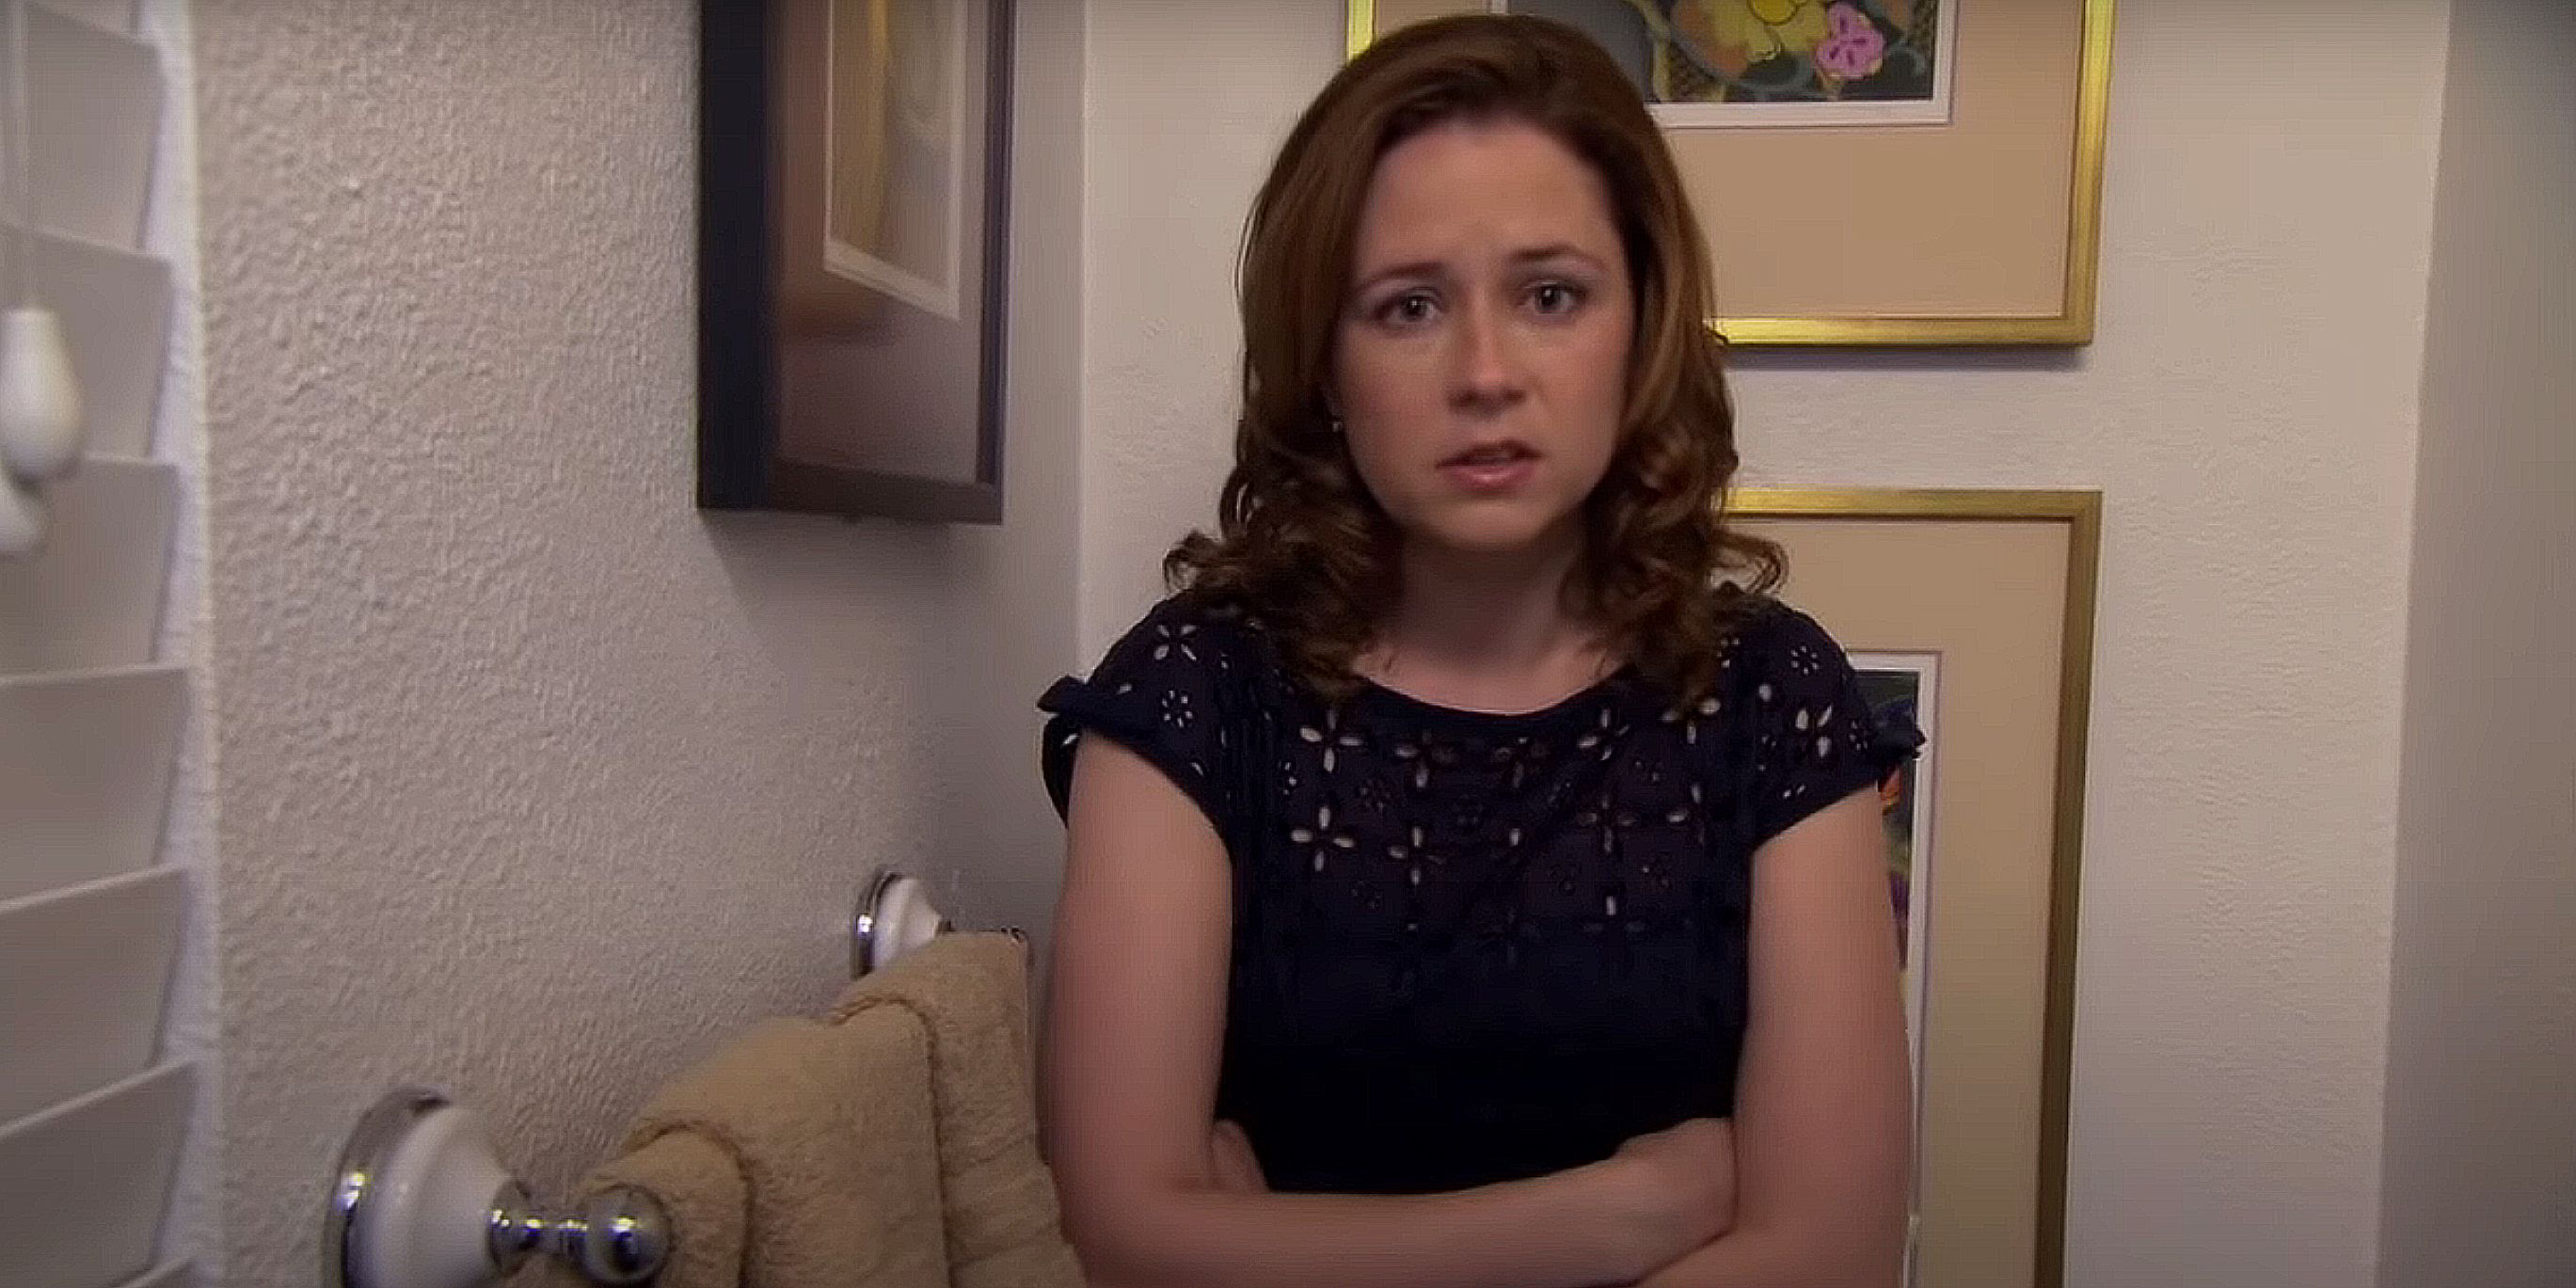 Pam hides in the bathroom at the dinner party in The Office.